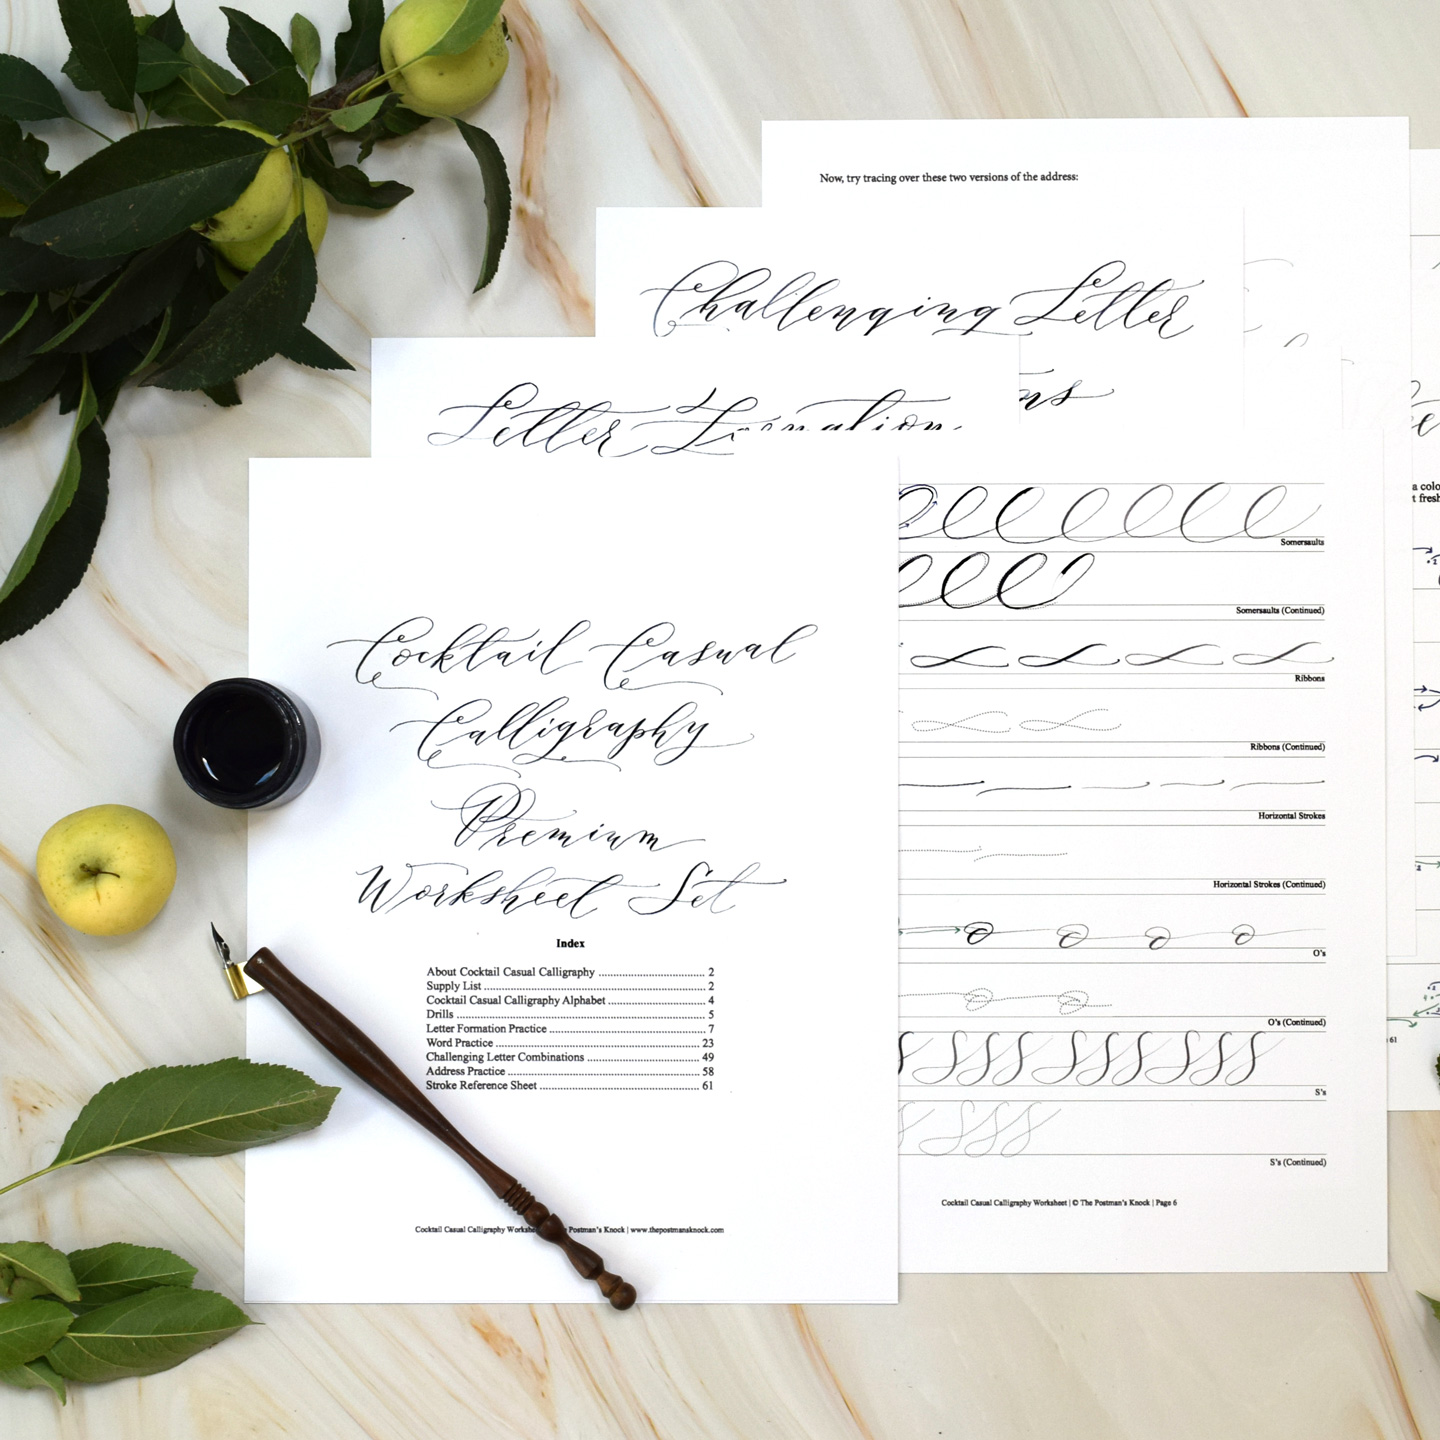 This premium worksheet set will teach you how to write in a bohemian, artistic calligraphy style.